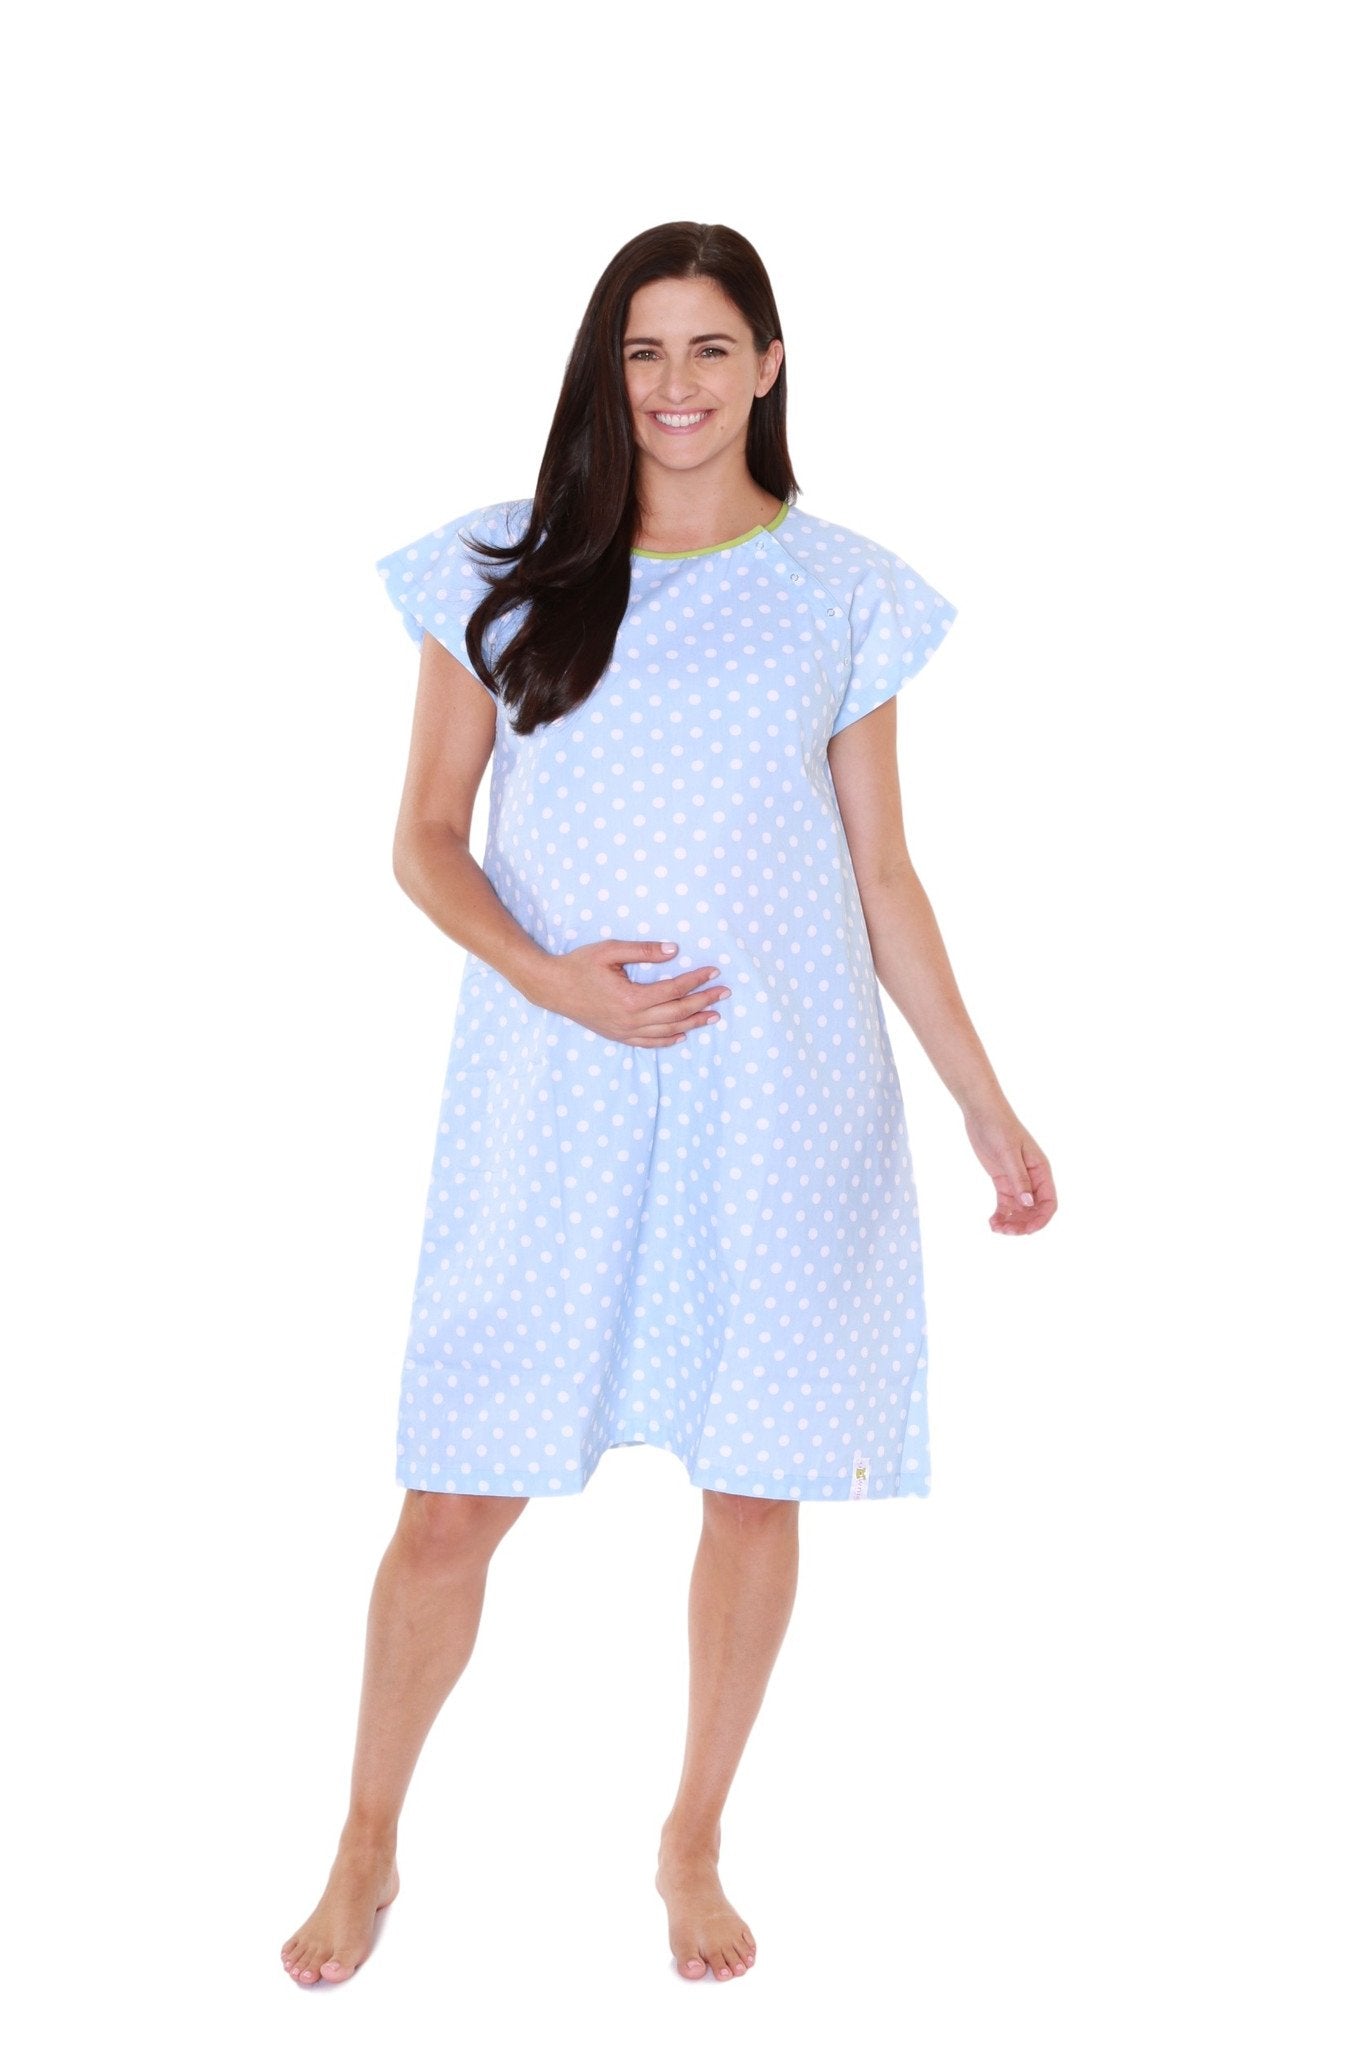 Nicole Gownie Maternity Delivery Labor Hospital Birthing Gown